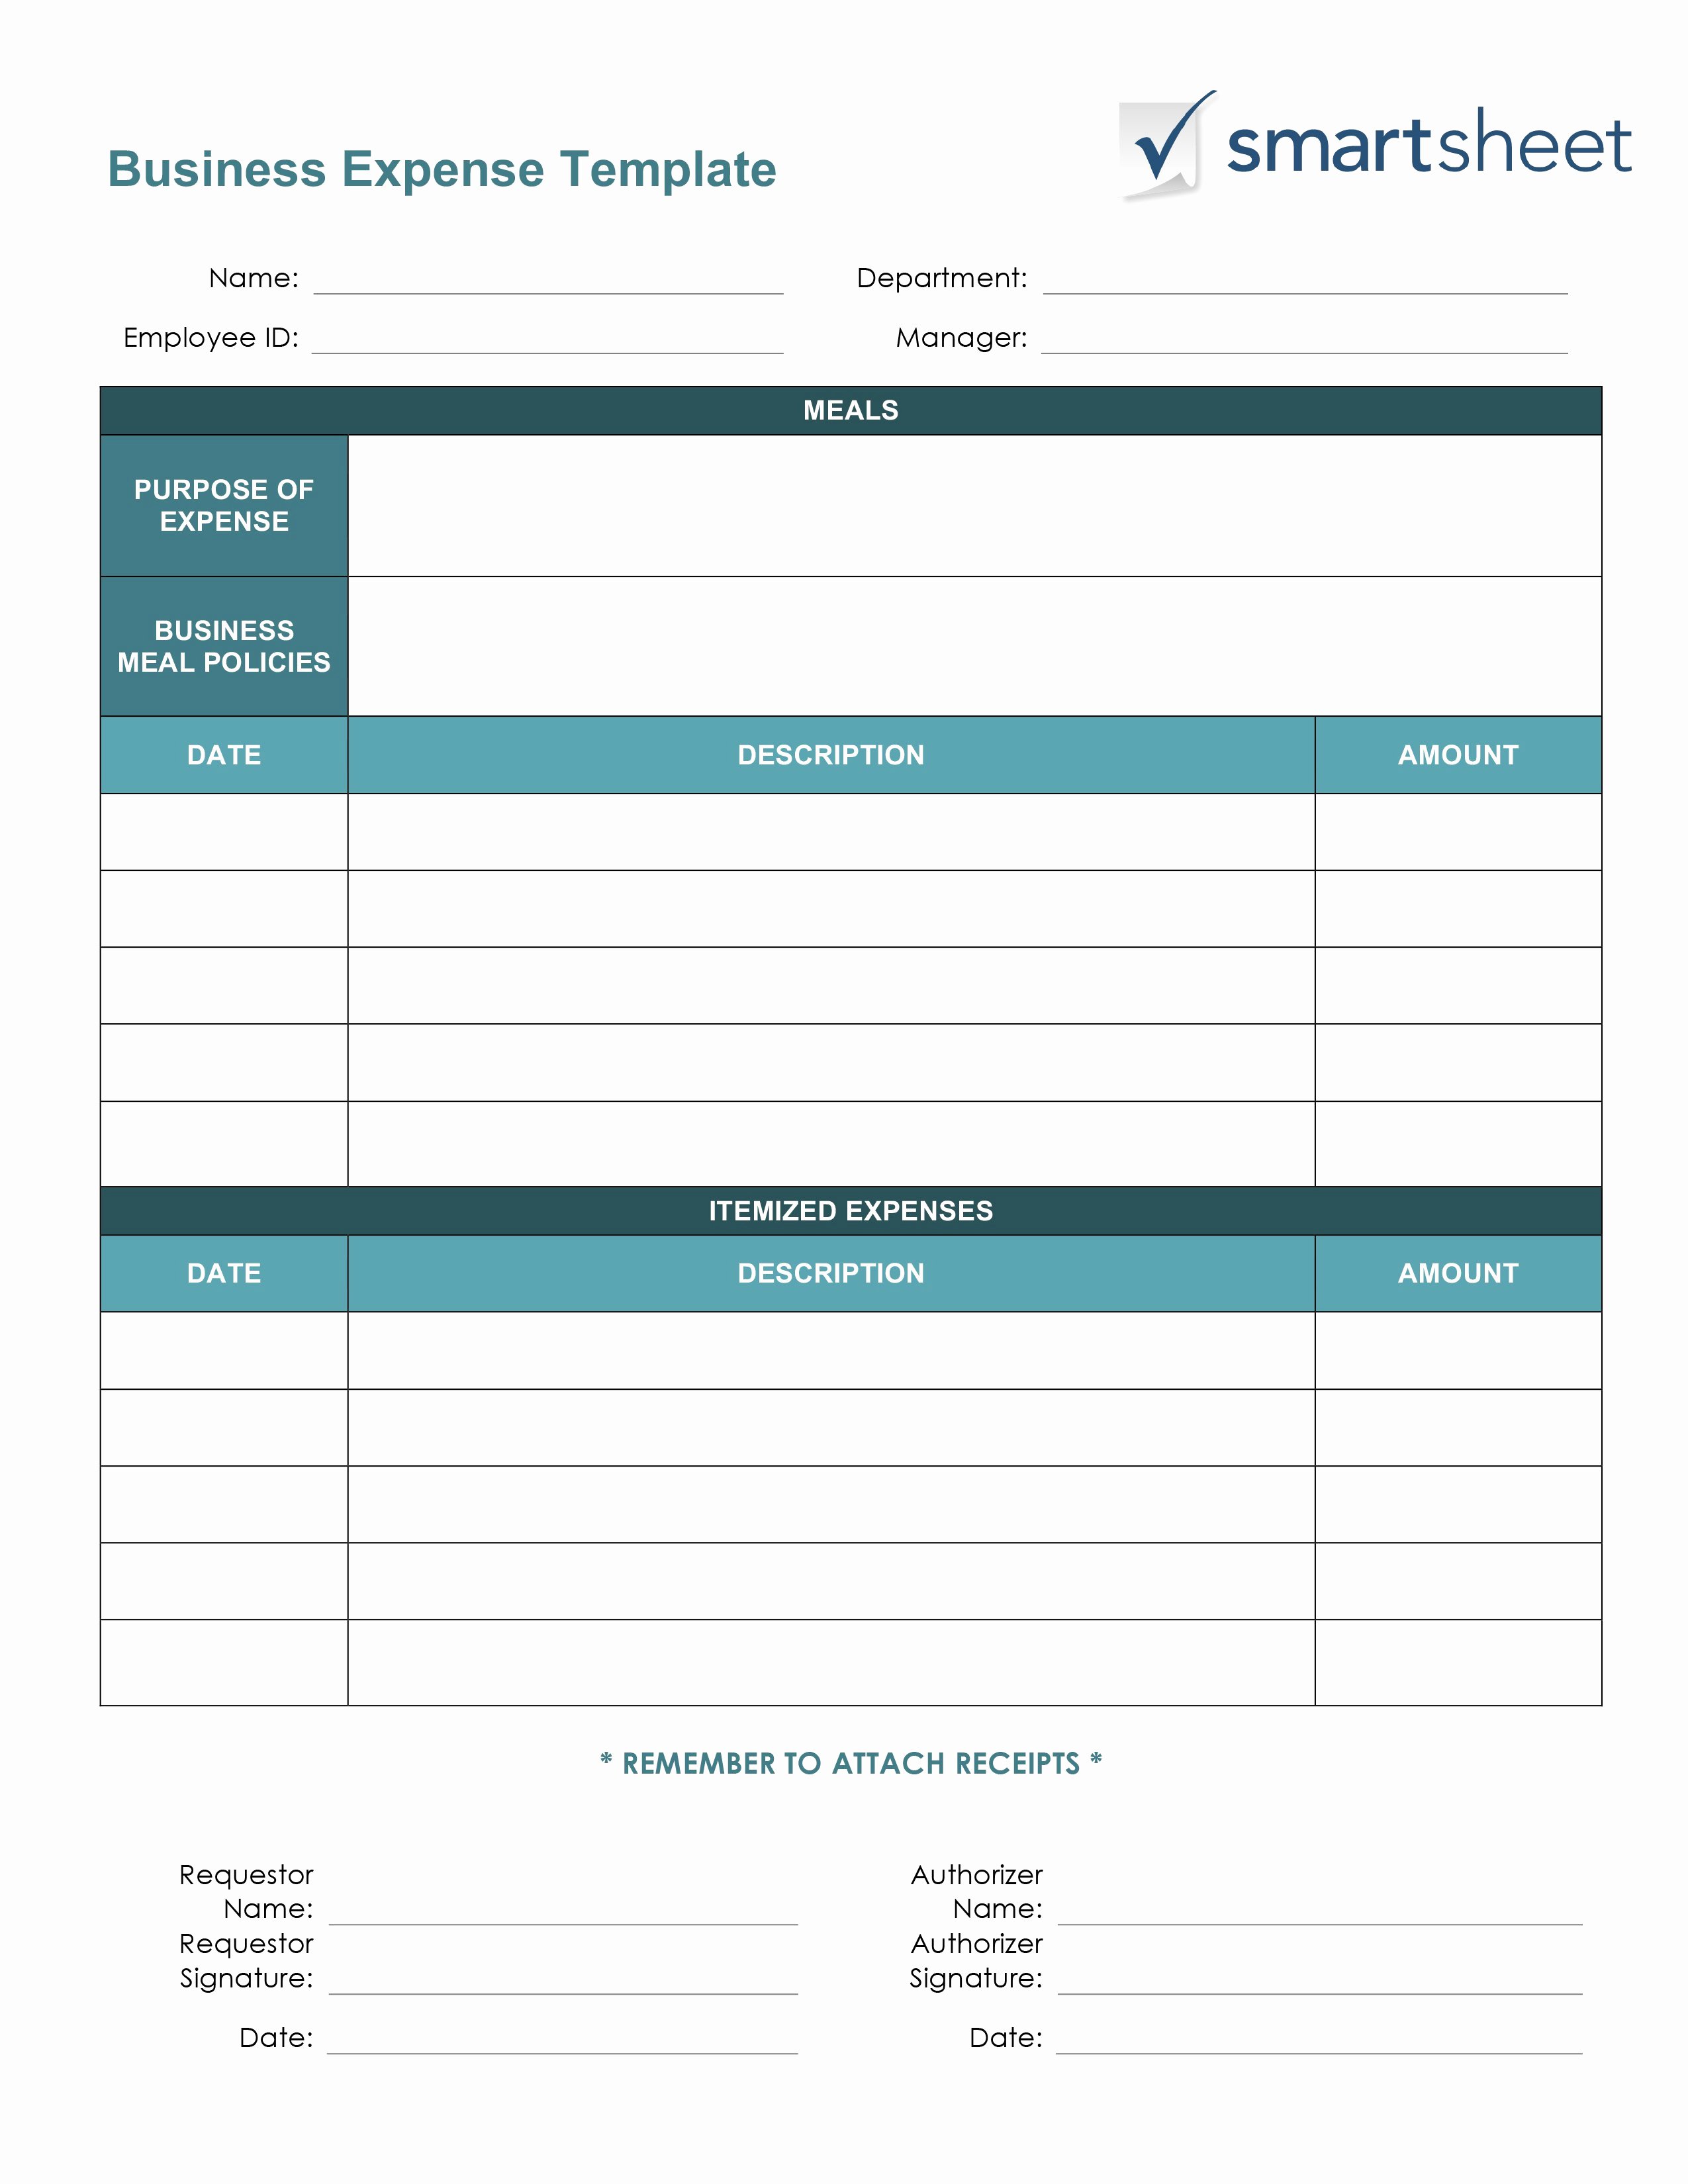 Business Expenses List Template Best Of Free Expense Report Templates Smartsheet